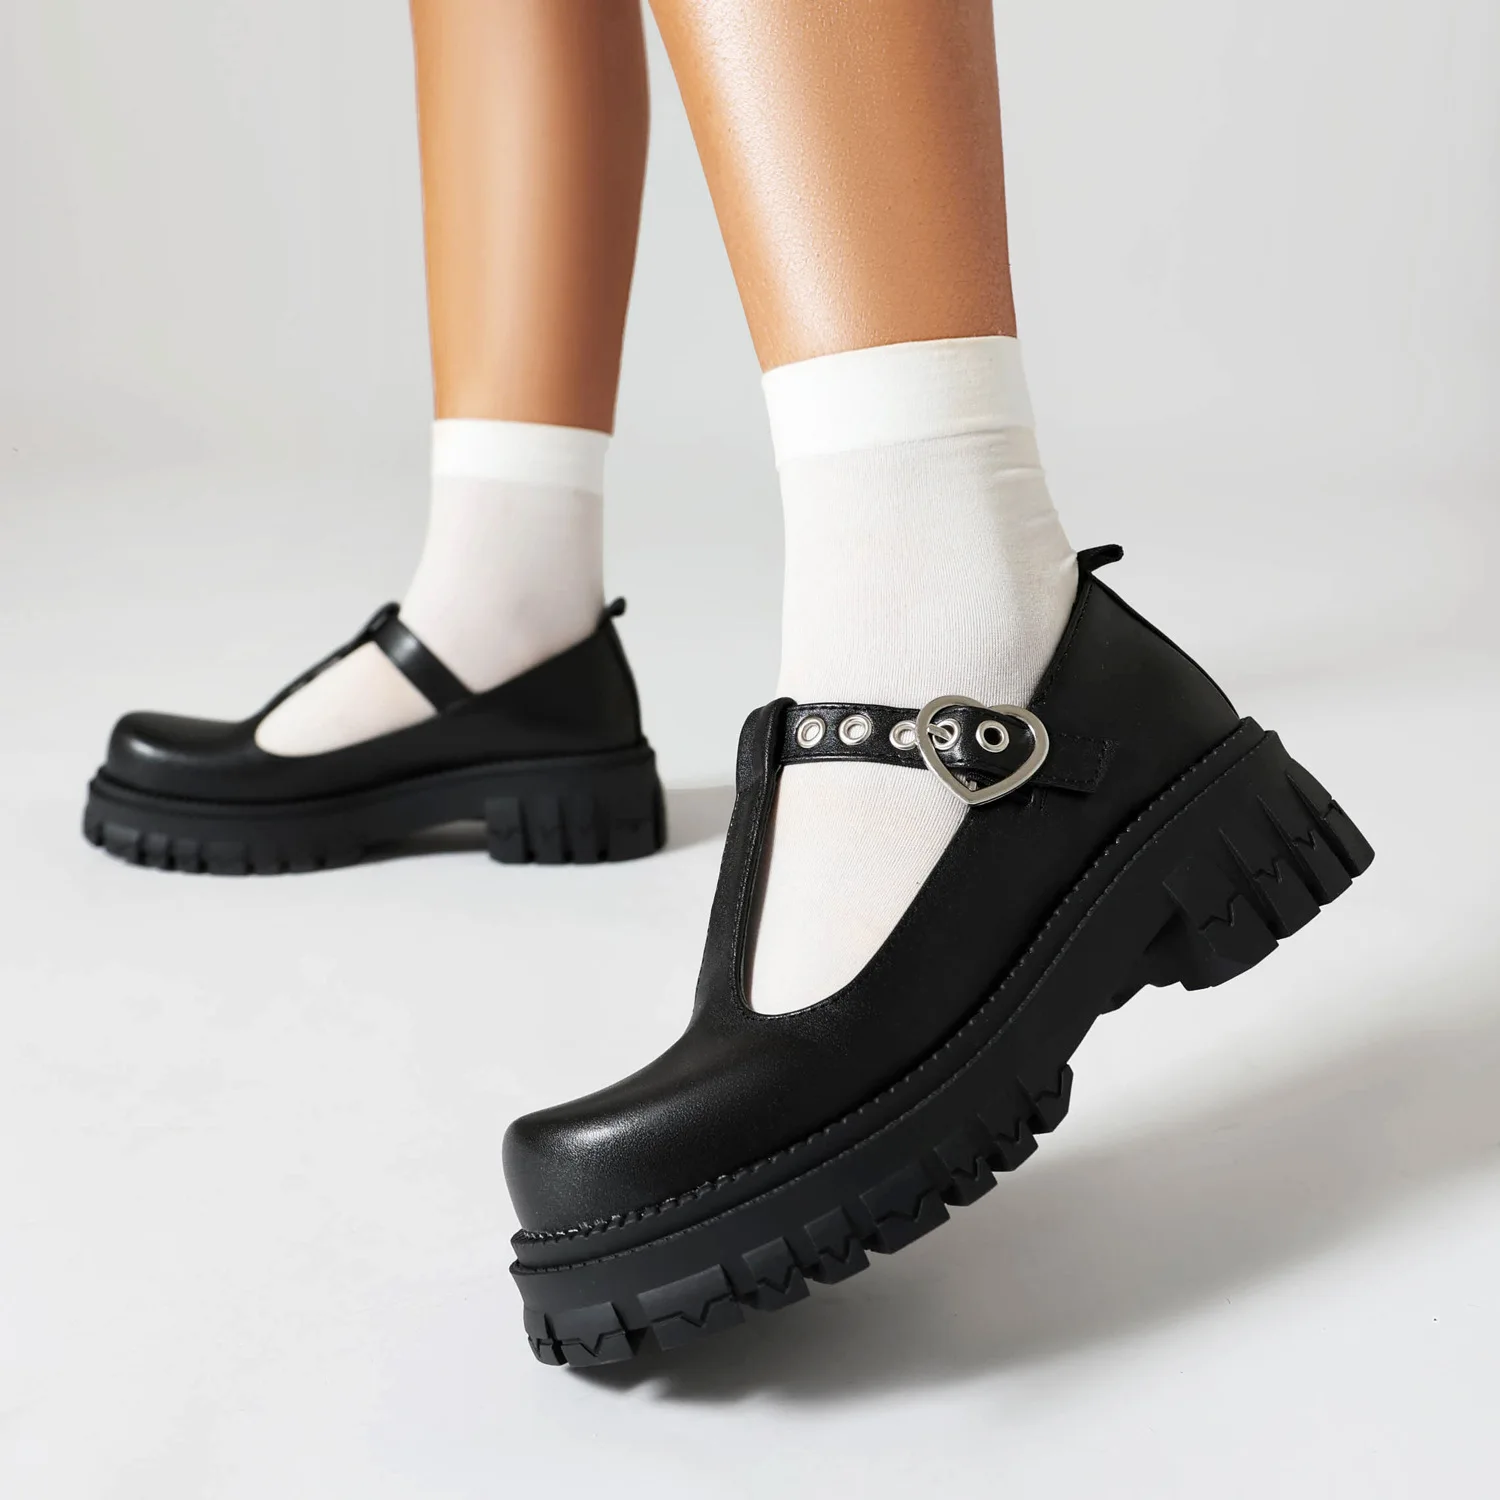 

Round Toe Big Size Shoes Woman Loafers With Fur Clogs Platform Casual Female Sneakers Flats Large Size Slip-on Creepers New Dres